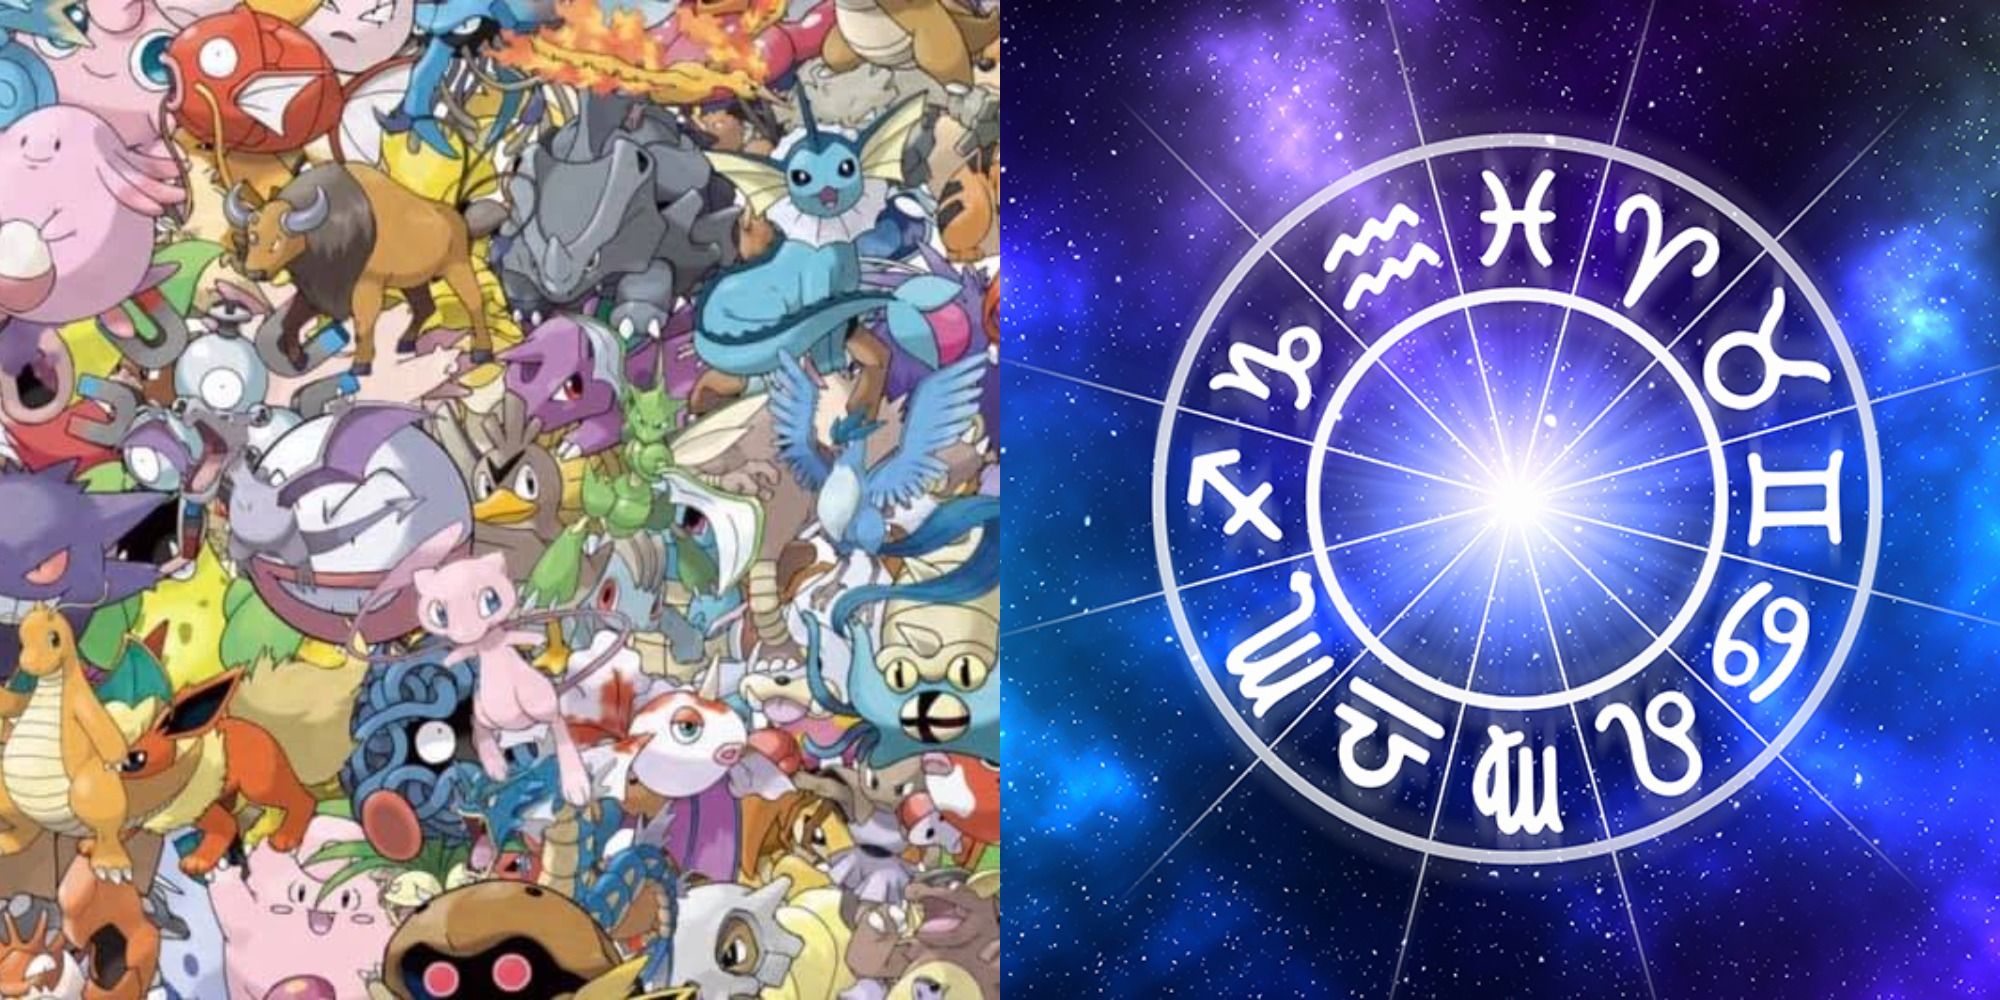 What Kind of Pokemon Are You Based on Your Zodiac Sign?